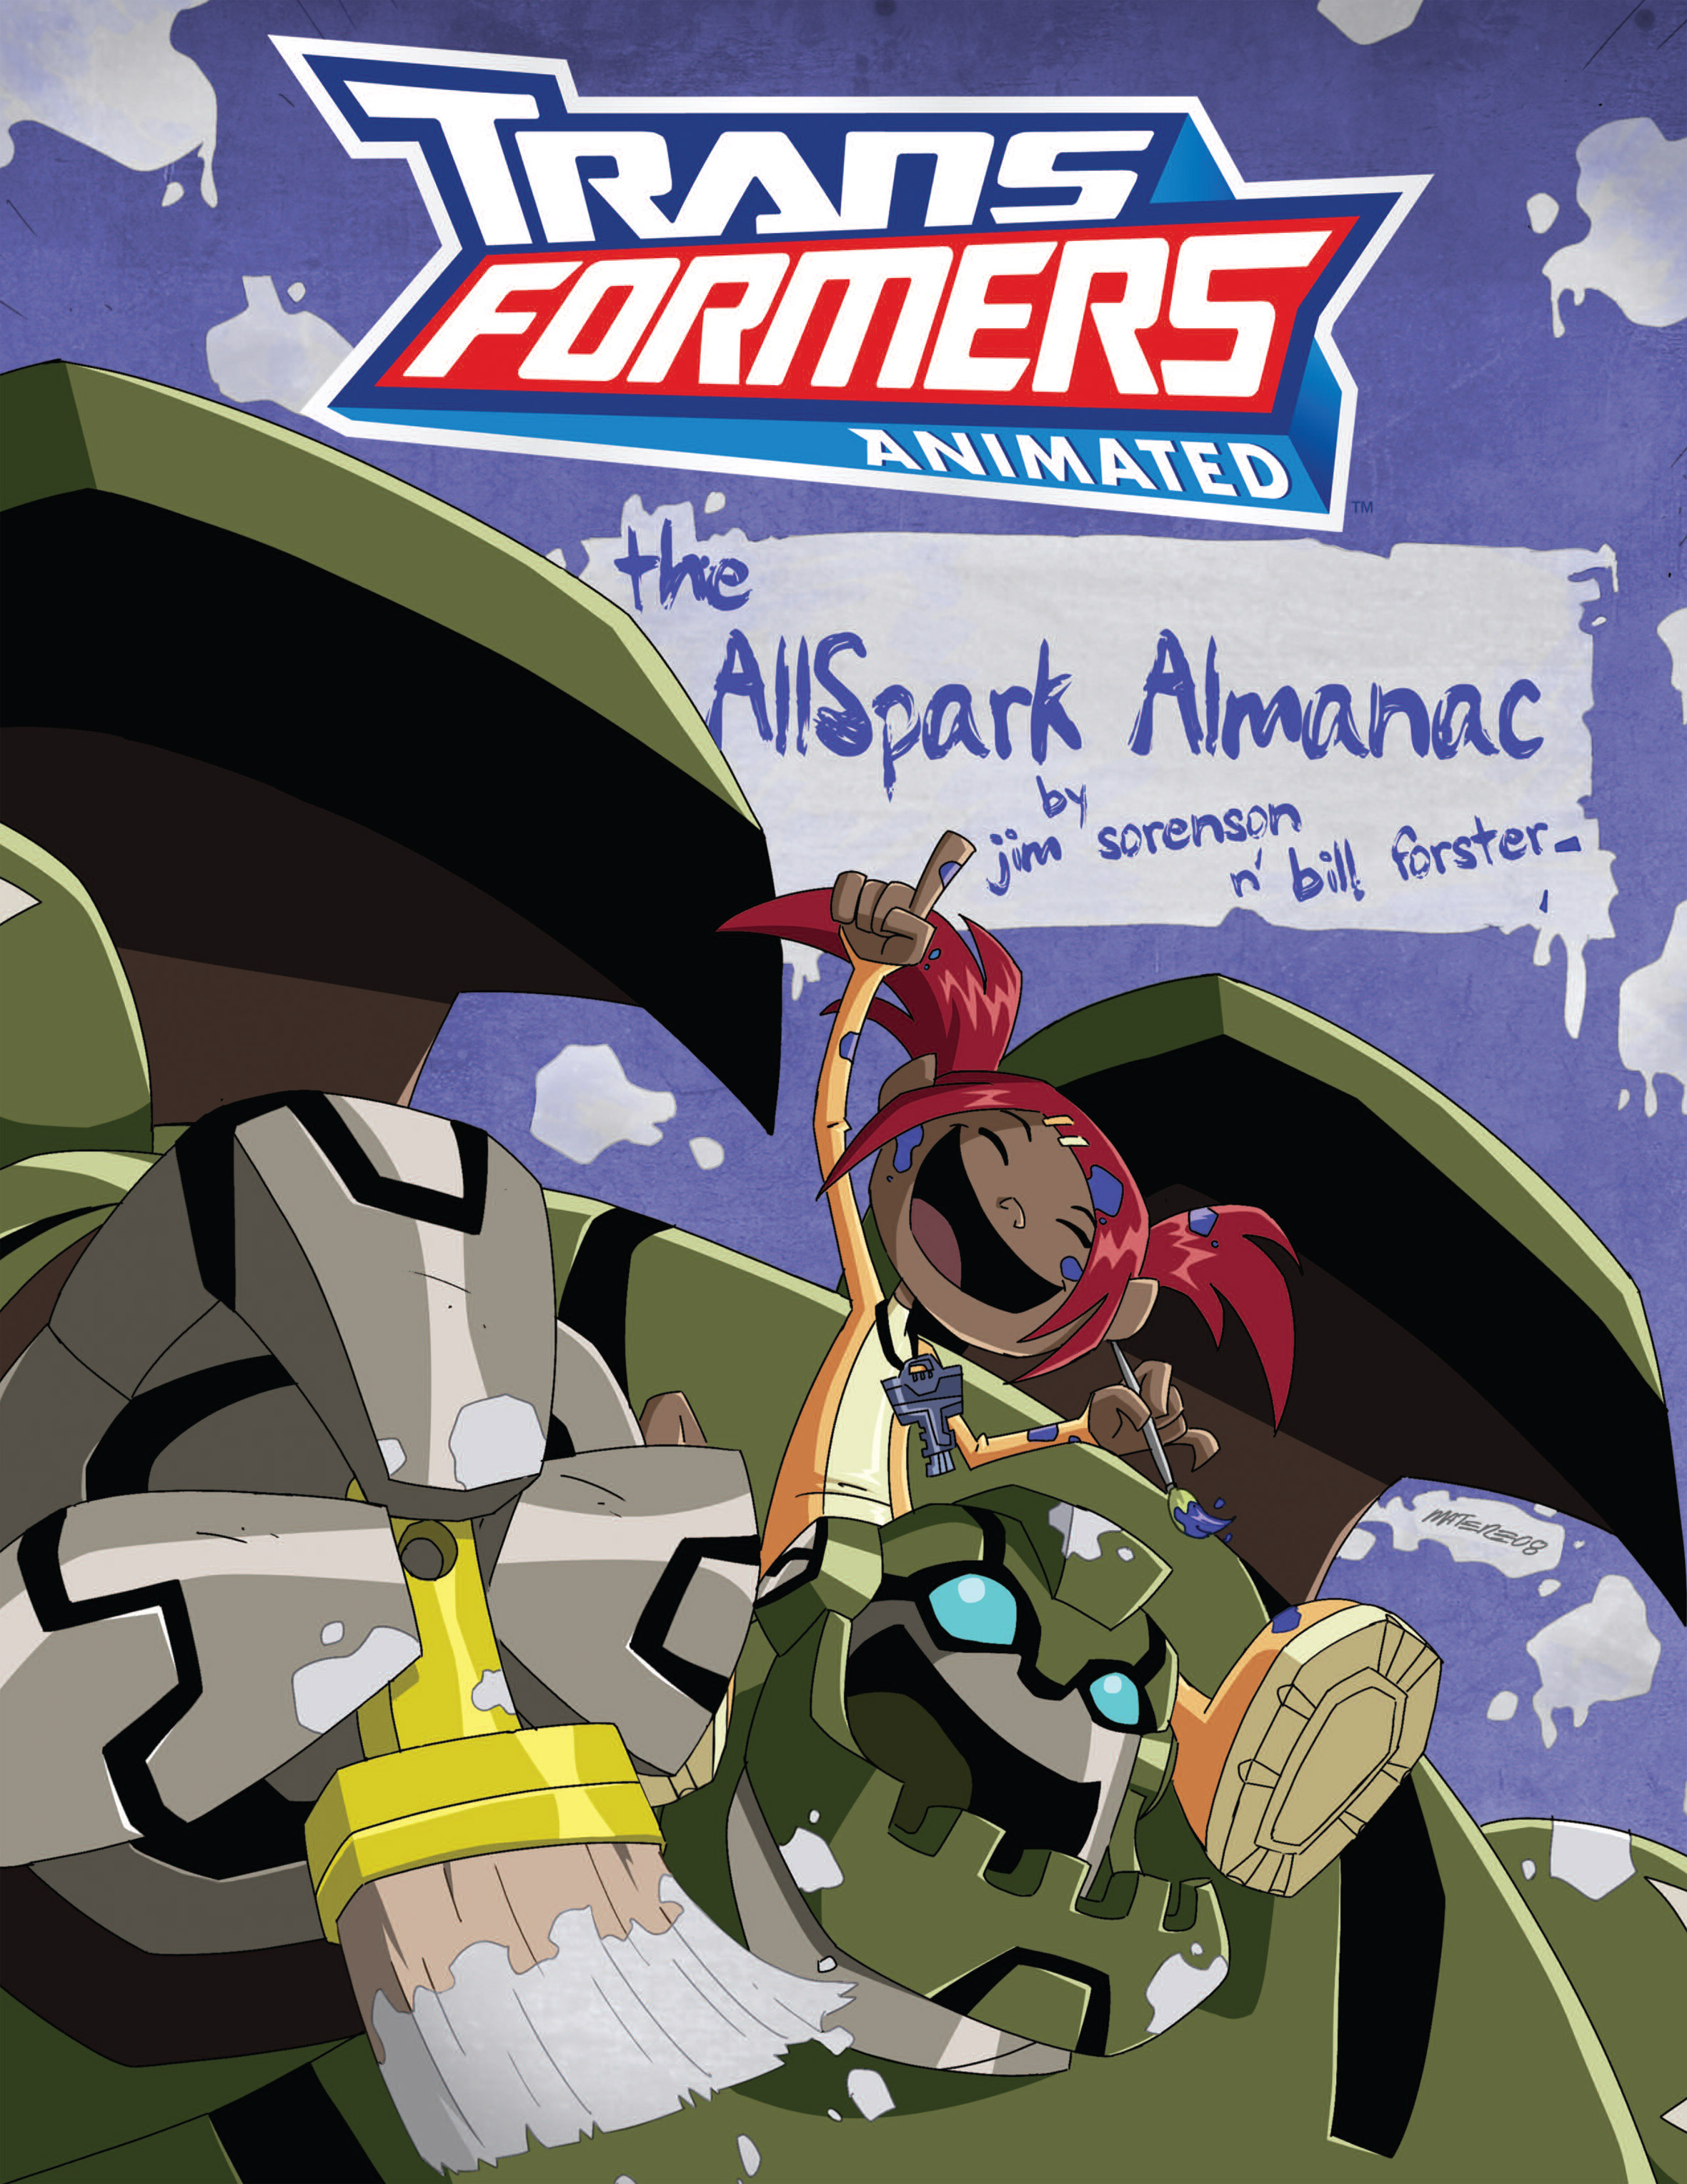 Read online Transformers Animated: The Allspark Almanac comic -  Issue # TPB 1 - 1